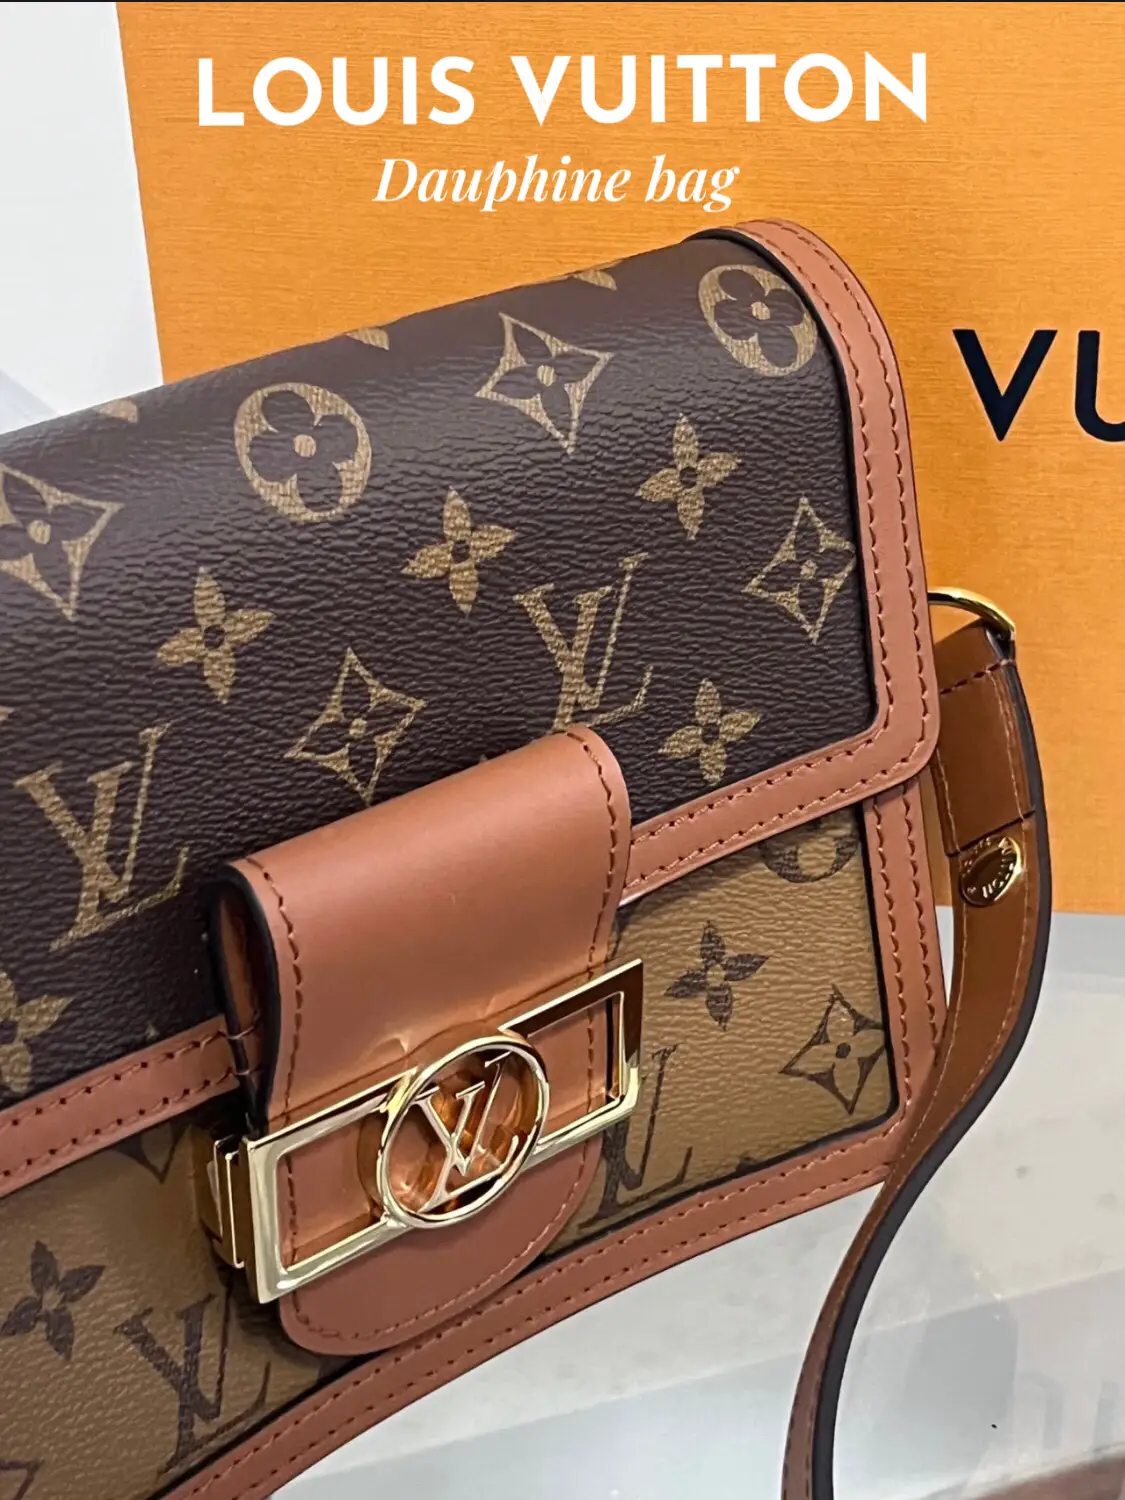 Louis Vuitton Dauphine Bag Review, Gallery posted by Hailey Collins